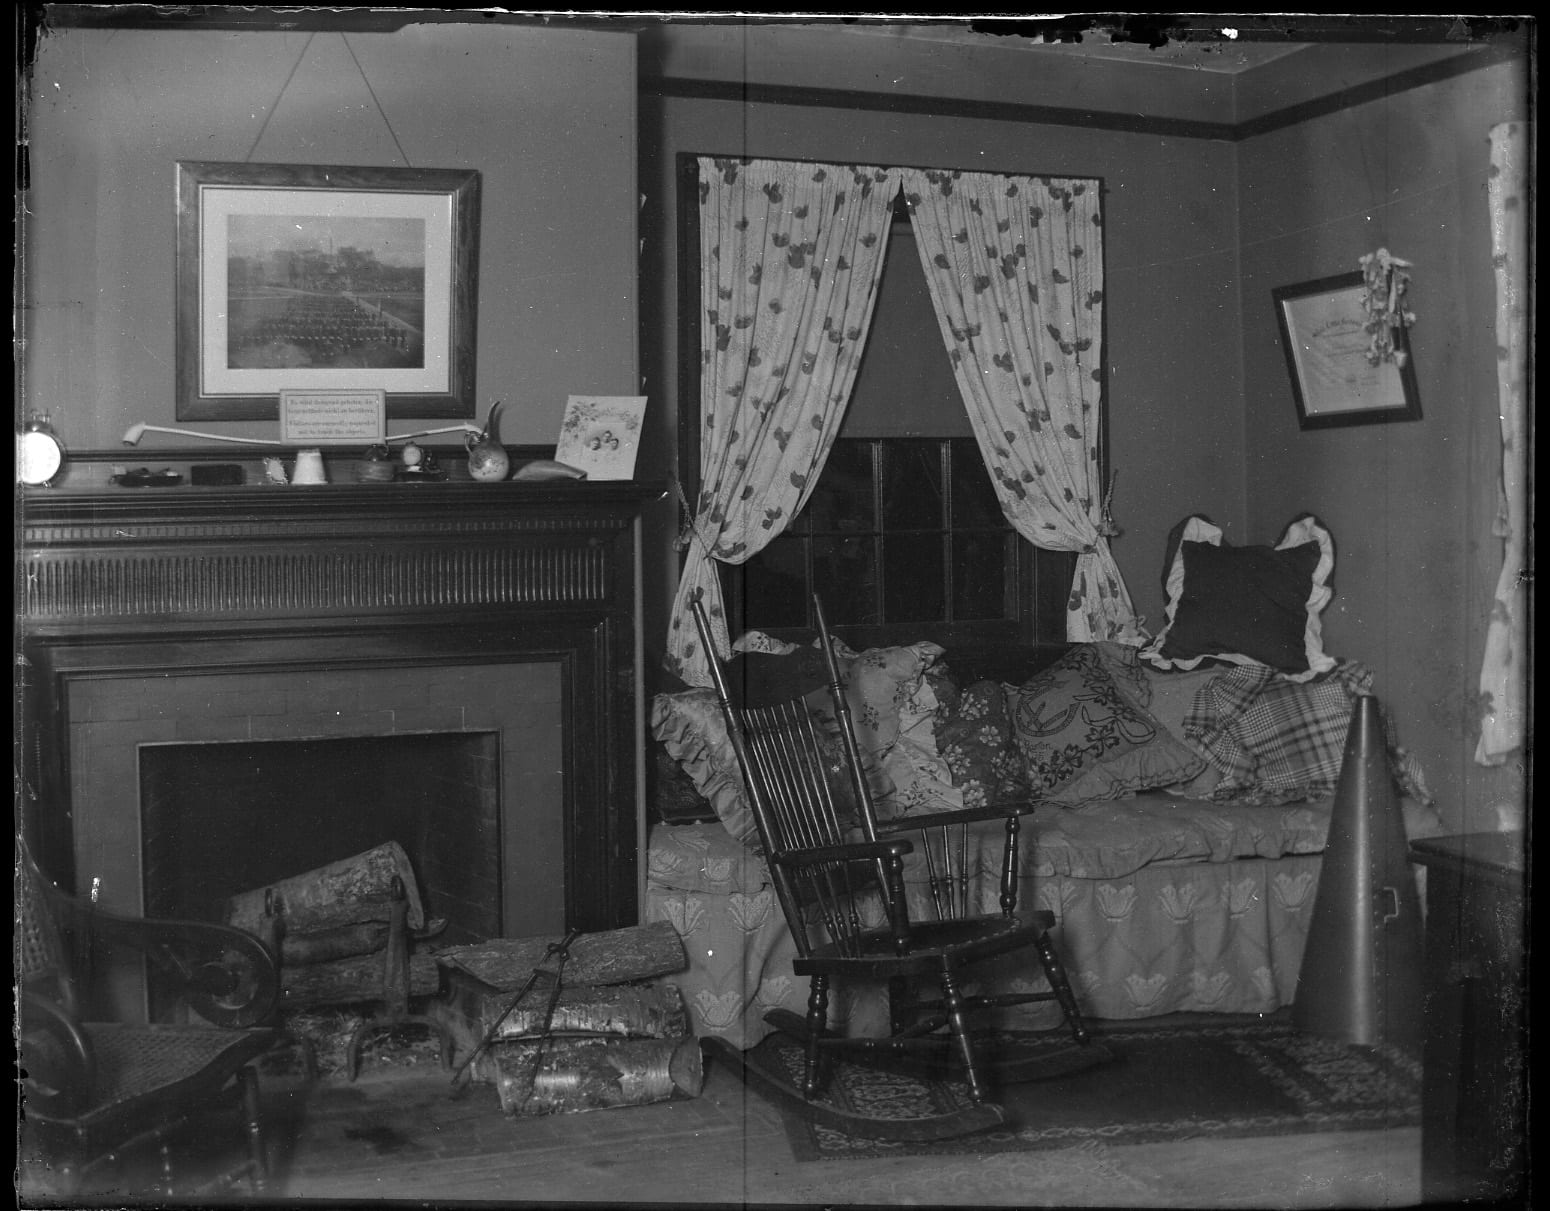 Student room, 30 South College, 1896 (Photograph Collection, glass plate negatives, box 42, no. 16)